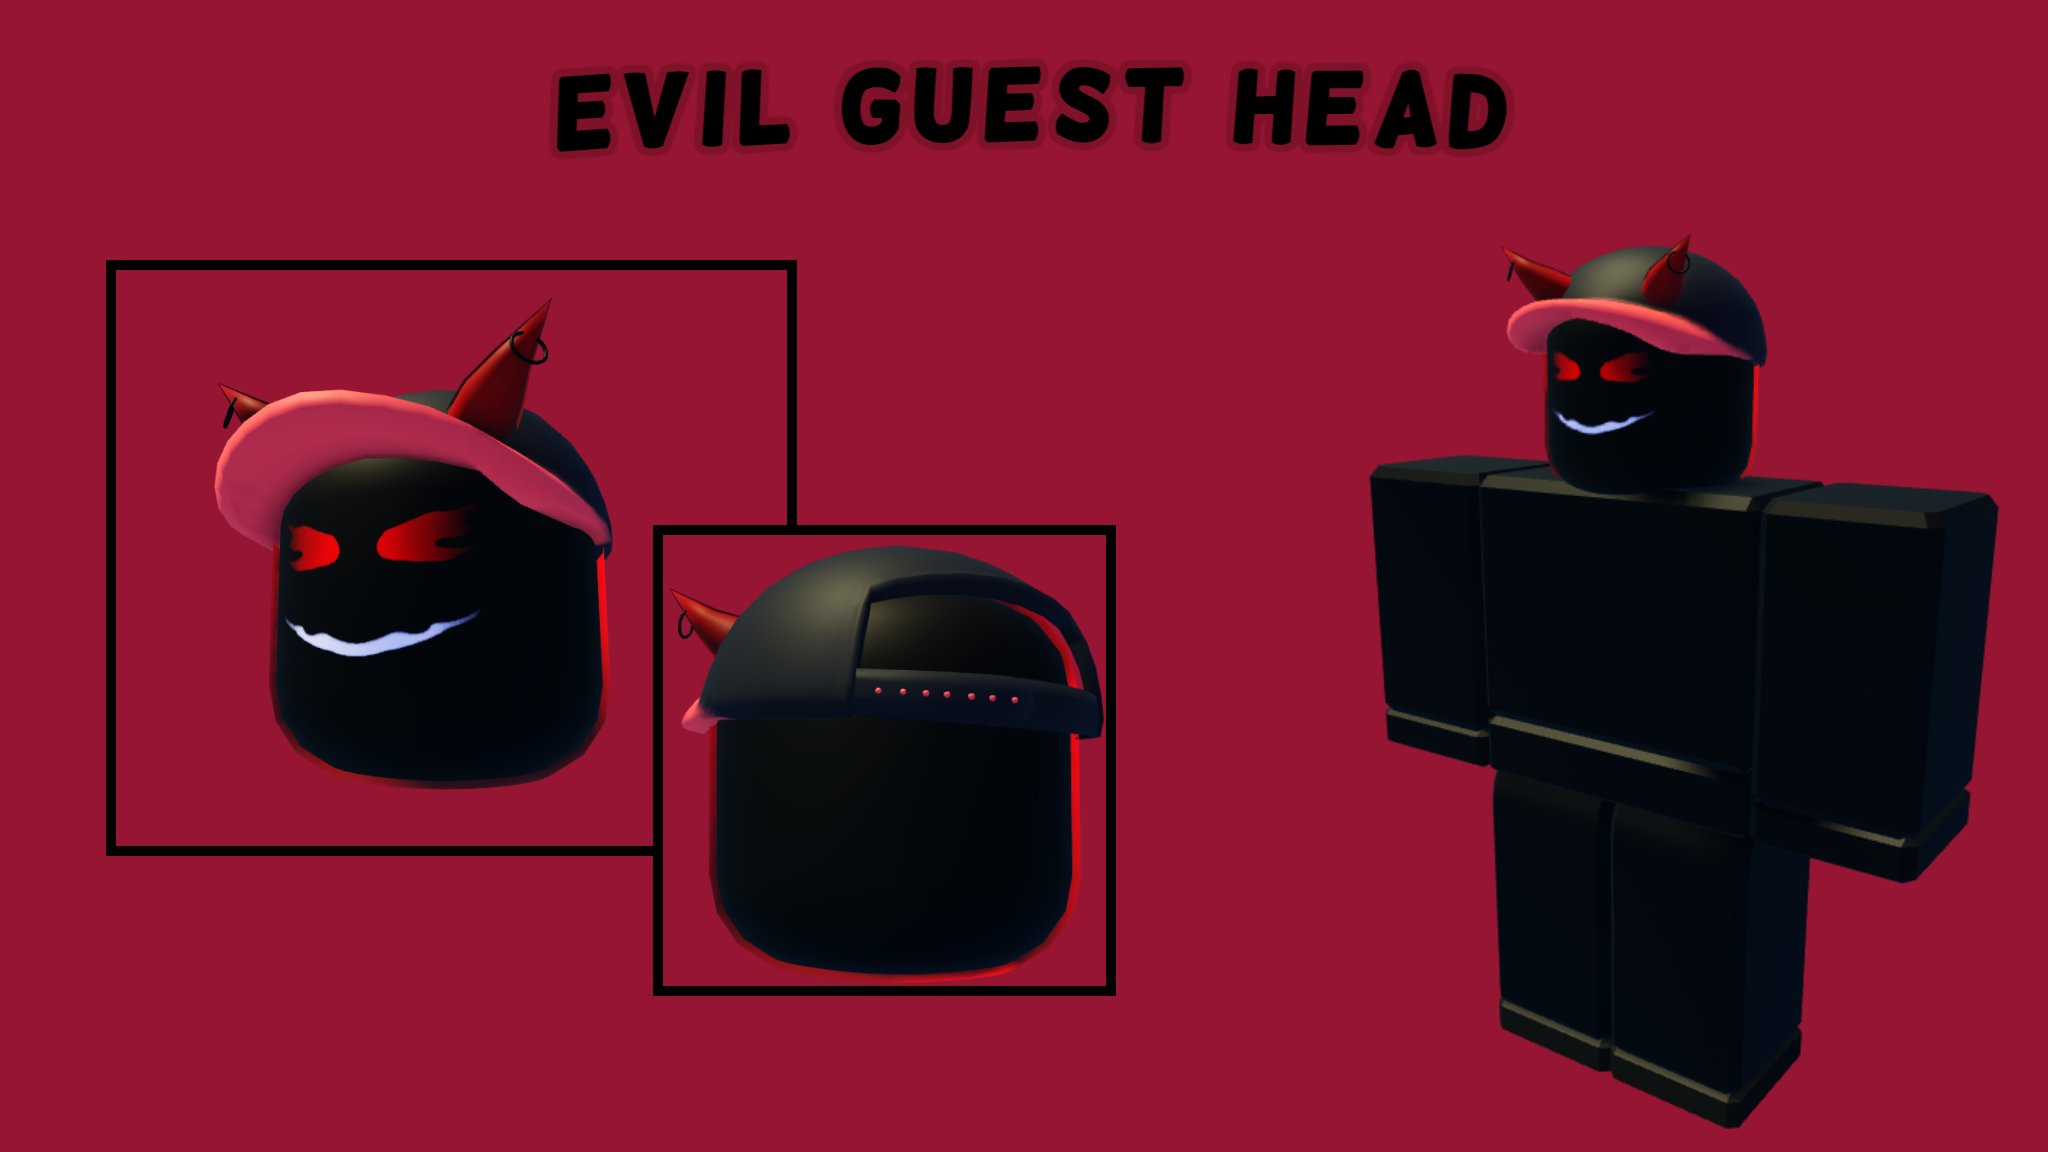 DevDrawn on X: 😈The Evil Guest Head😈 Coming Soon to Roblox #Roblox  #RobloxDev #RobloxUGC #3dmodeling #gamedev #RobloxUGCConcept   / X